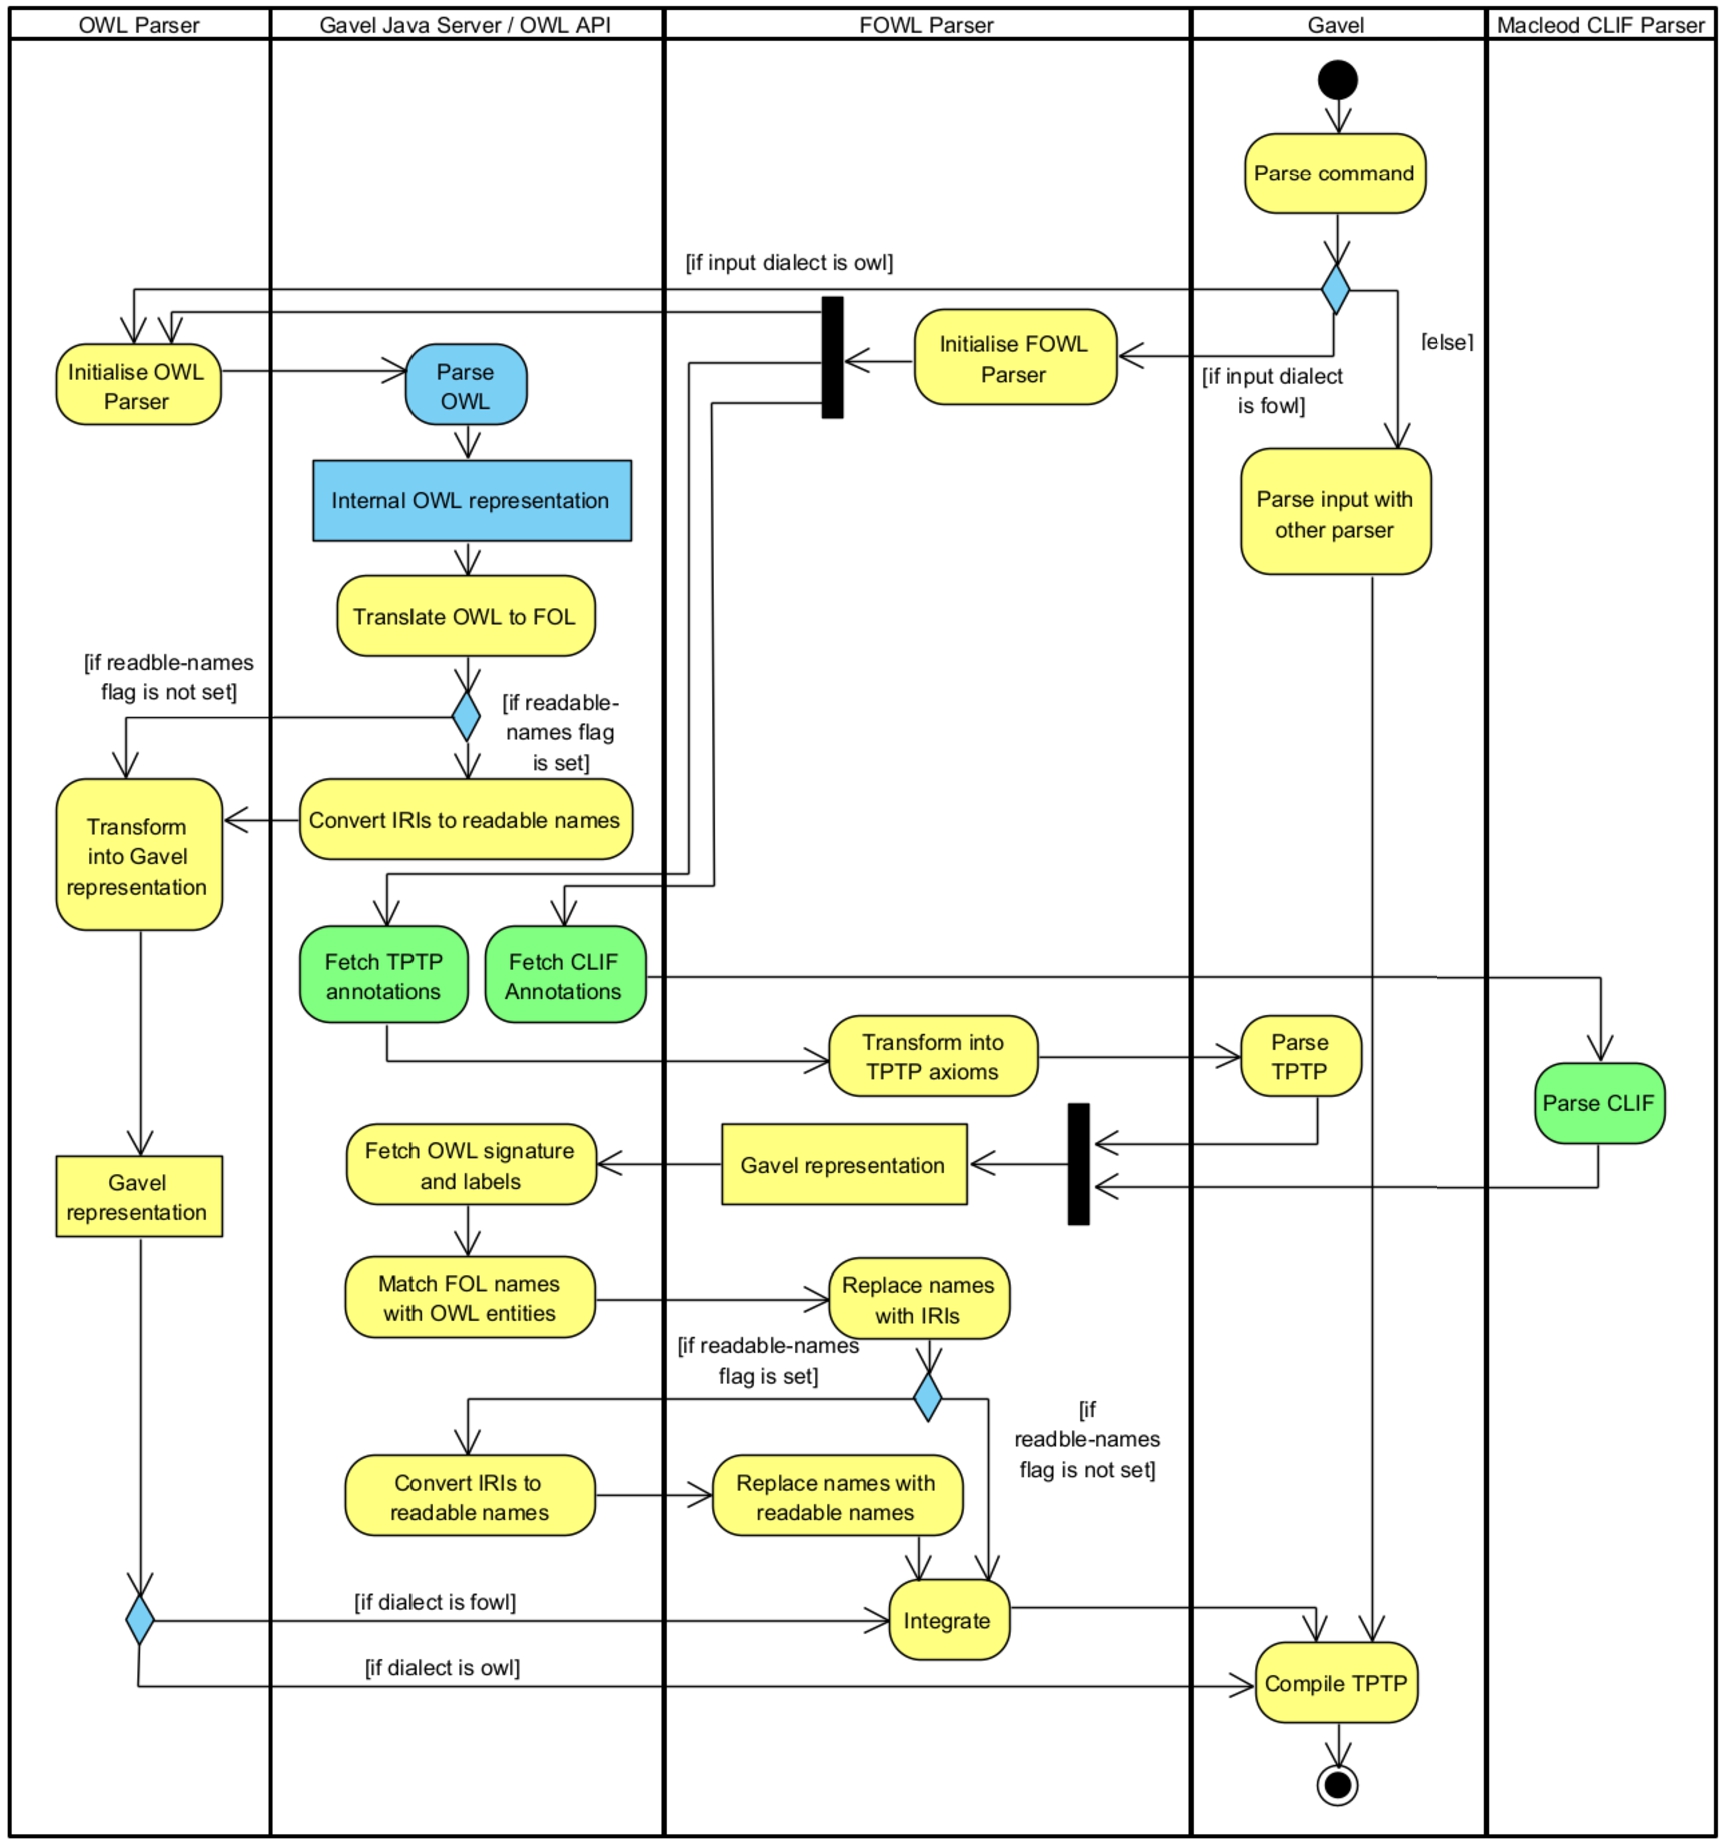 A UML activity diagram illustrating the process of translating an annotated OWL ontology or standard OWL ontology into TPTP. Actions that were newly implemented for the translation tasks are shown in yellow, actions that were reused from existing tools are marked in blue. For green actions, the existing functionality has been extended.